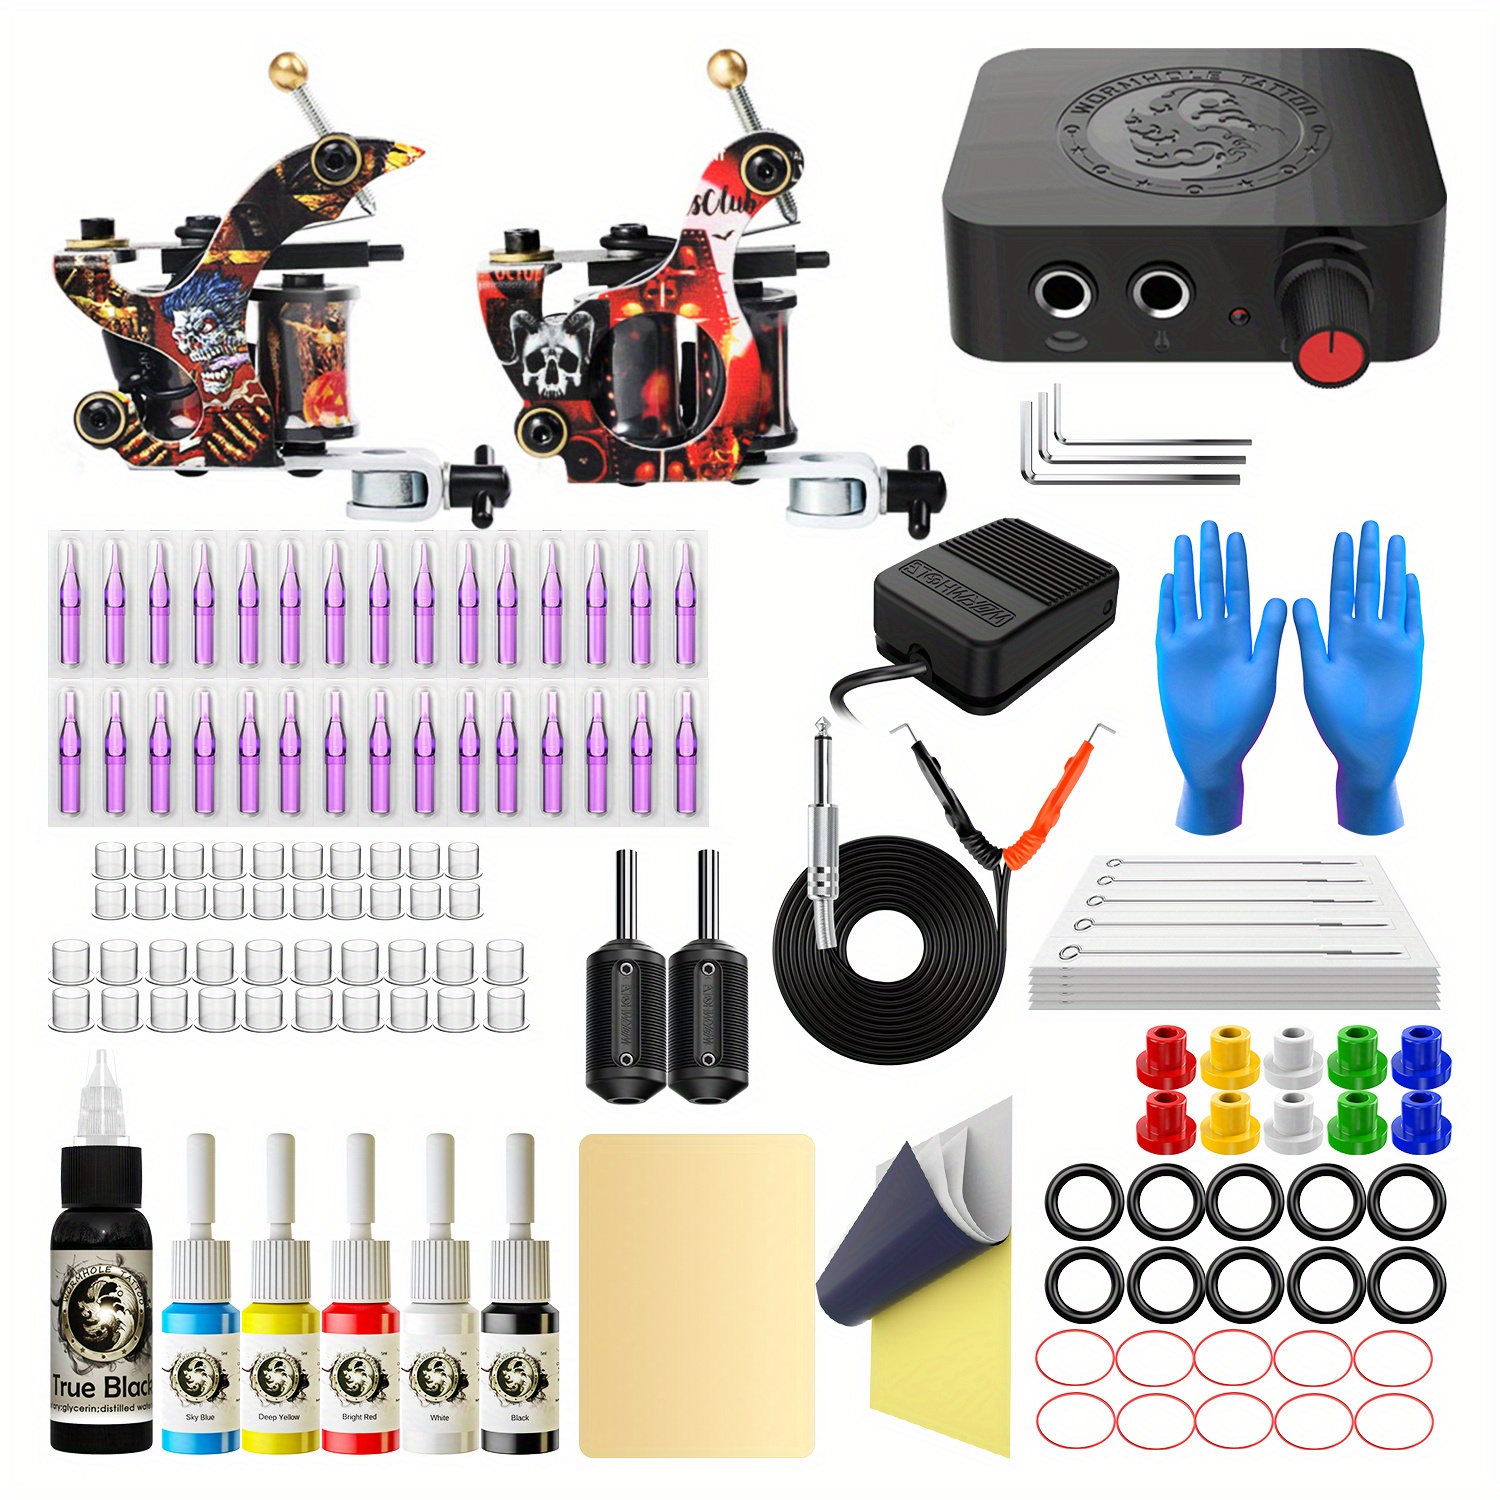 Tattoo Supplies Kit - Complete Tattoo Machine Kit Including 2 Pro Coils  Tattoo Gun Needles Tips Grips Foot Pedal Power Supply Tattoo Accessories  for